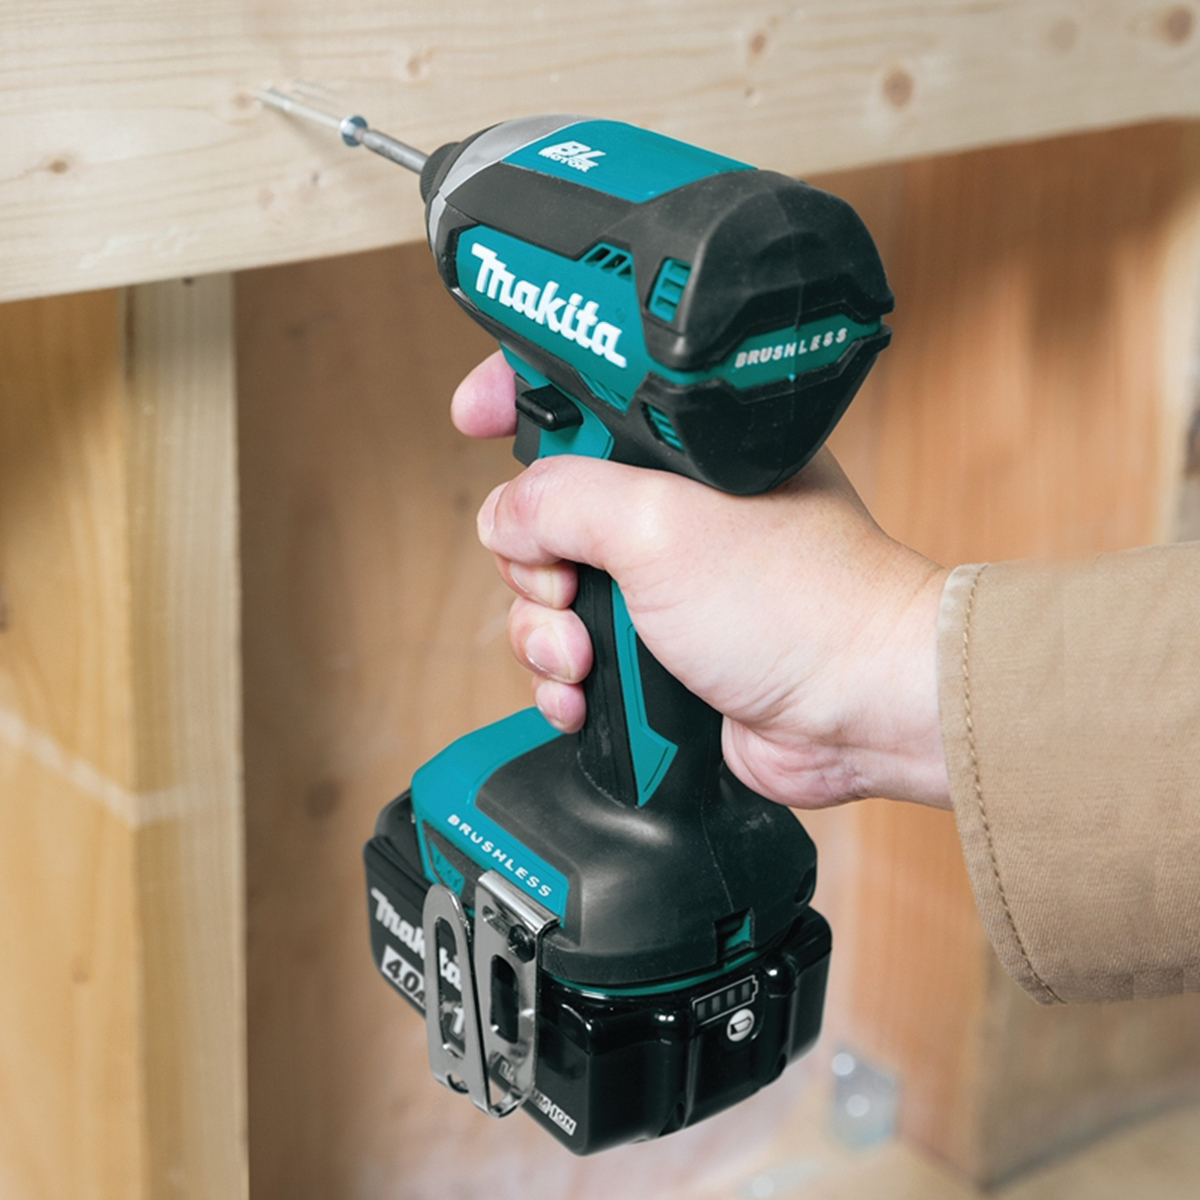 Makita LXT XDT13SM1 Cordless Impact Driver, Battery Included, 18 V, 4 Ah, 1/4 in Drive, Hex Drive, 0 to 3600 ipm - 5